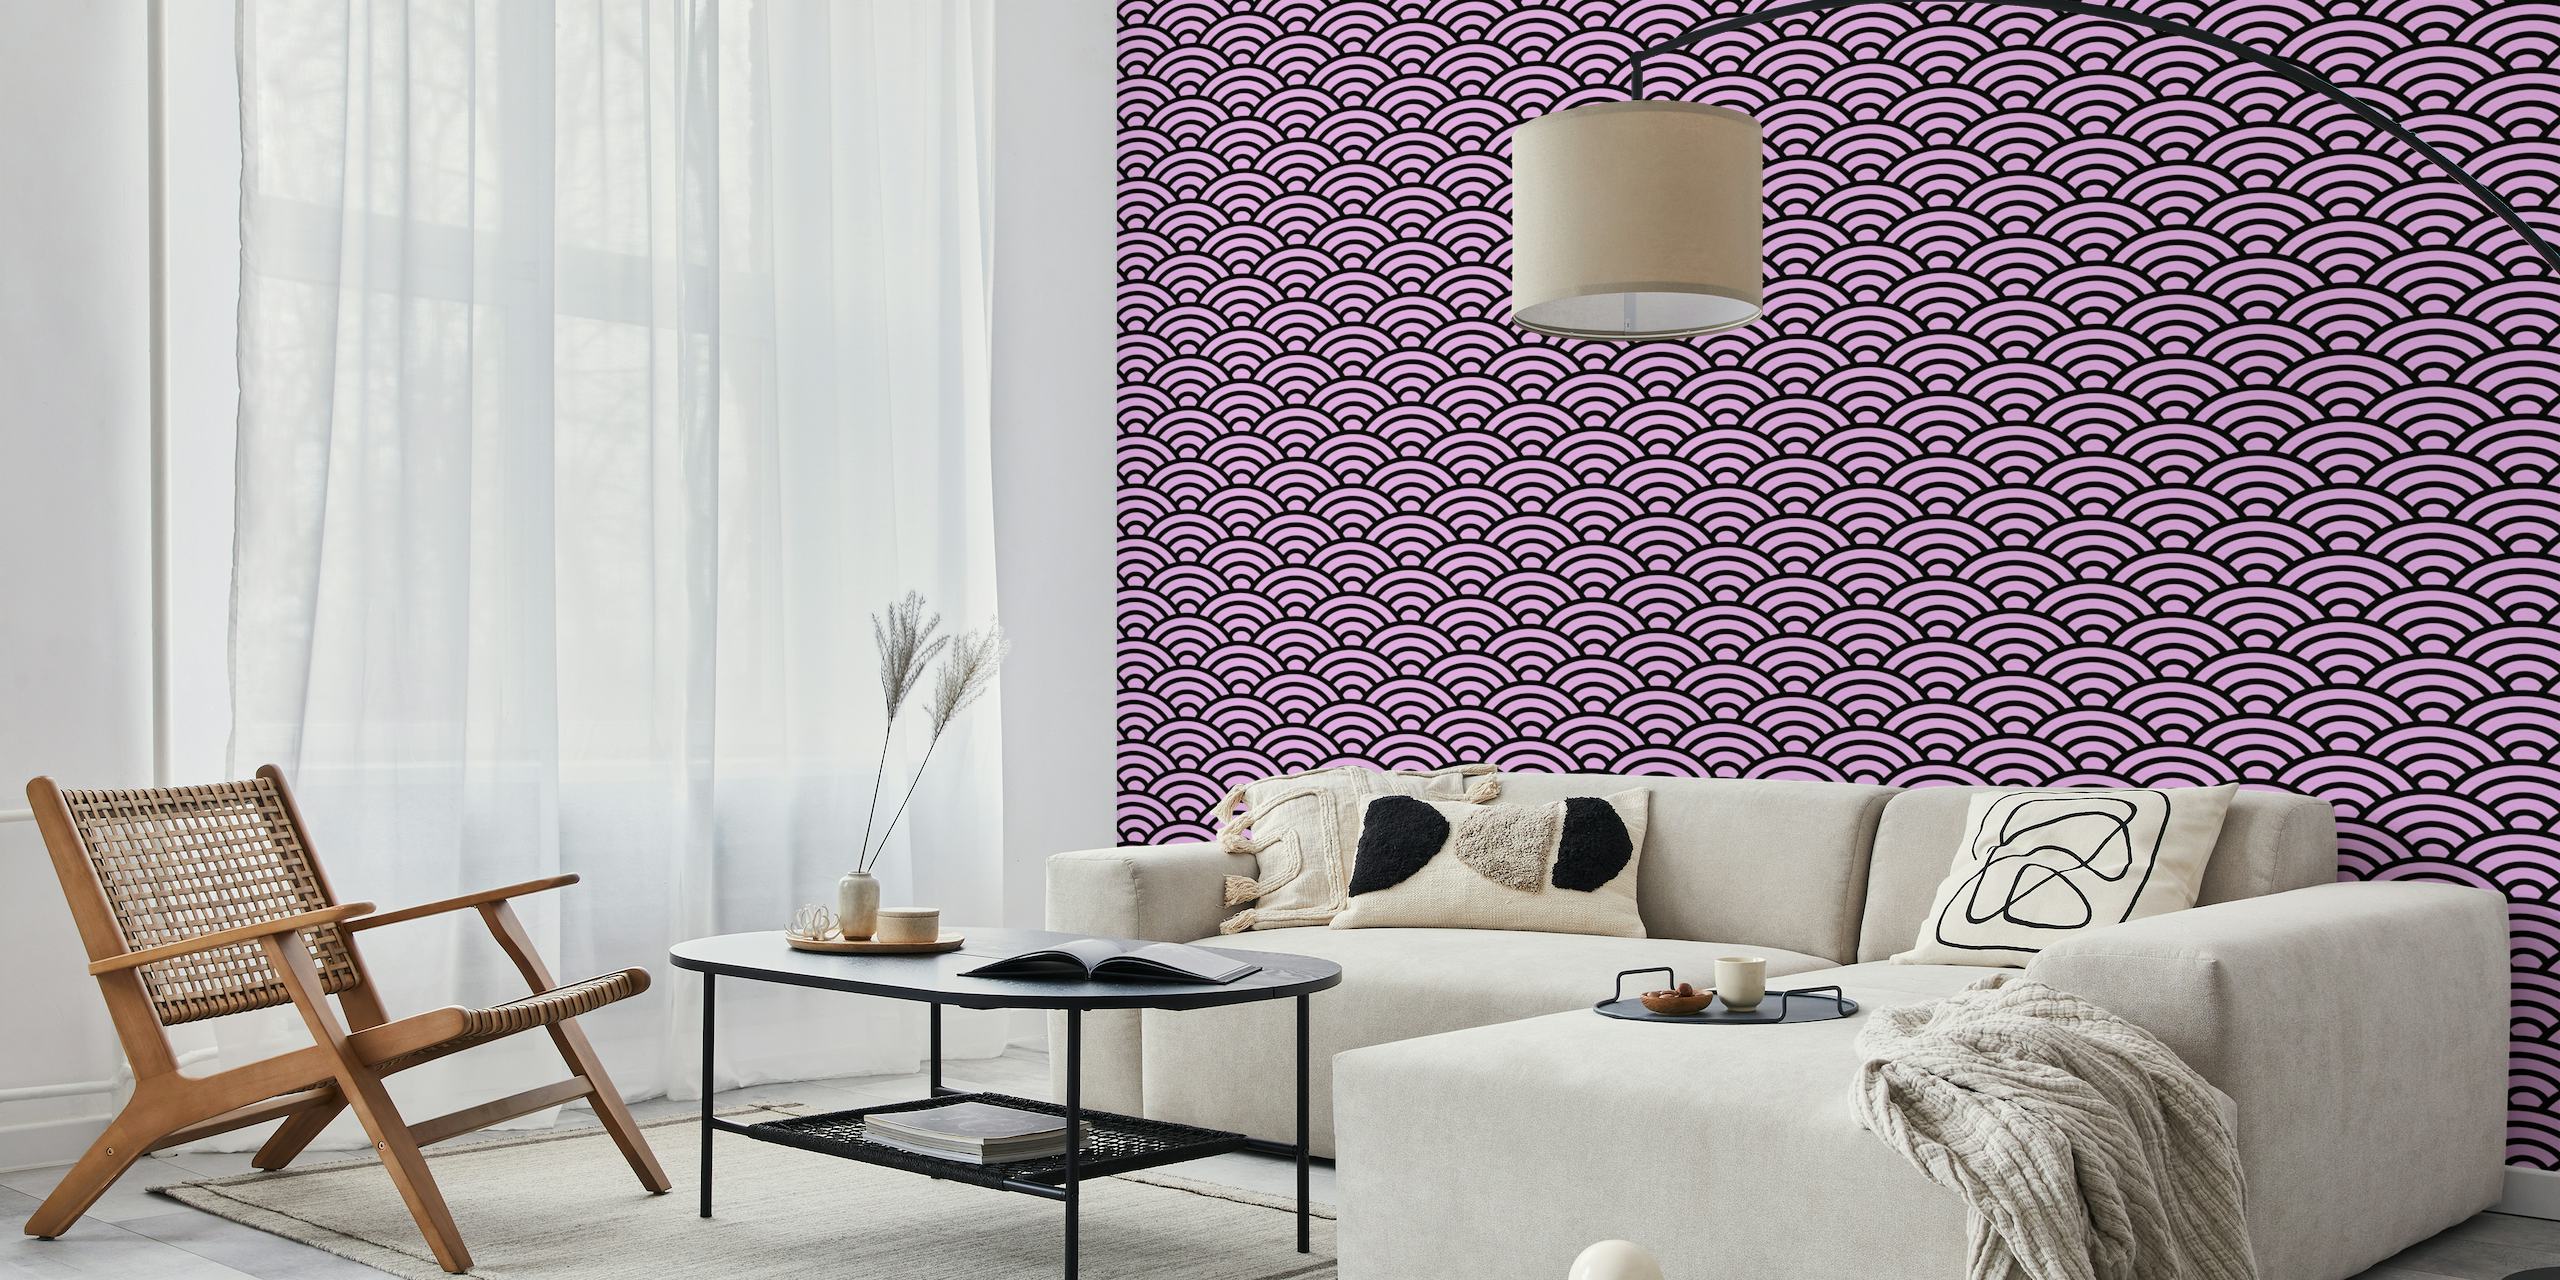 Seigaiha wave motif in Pink and Black papiers peint